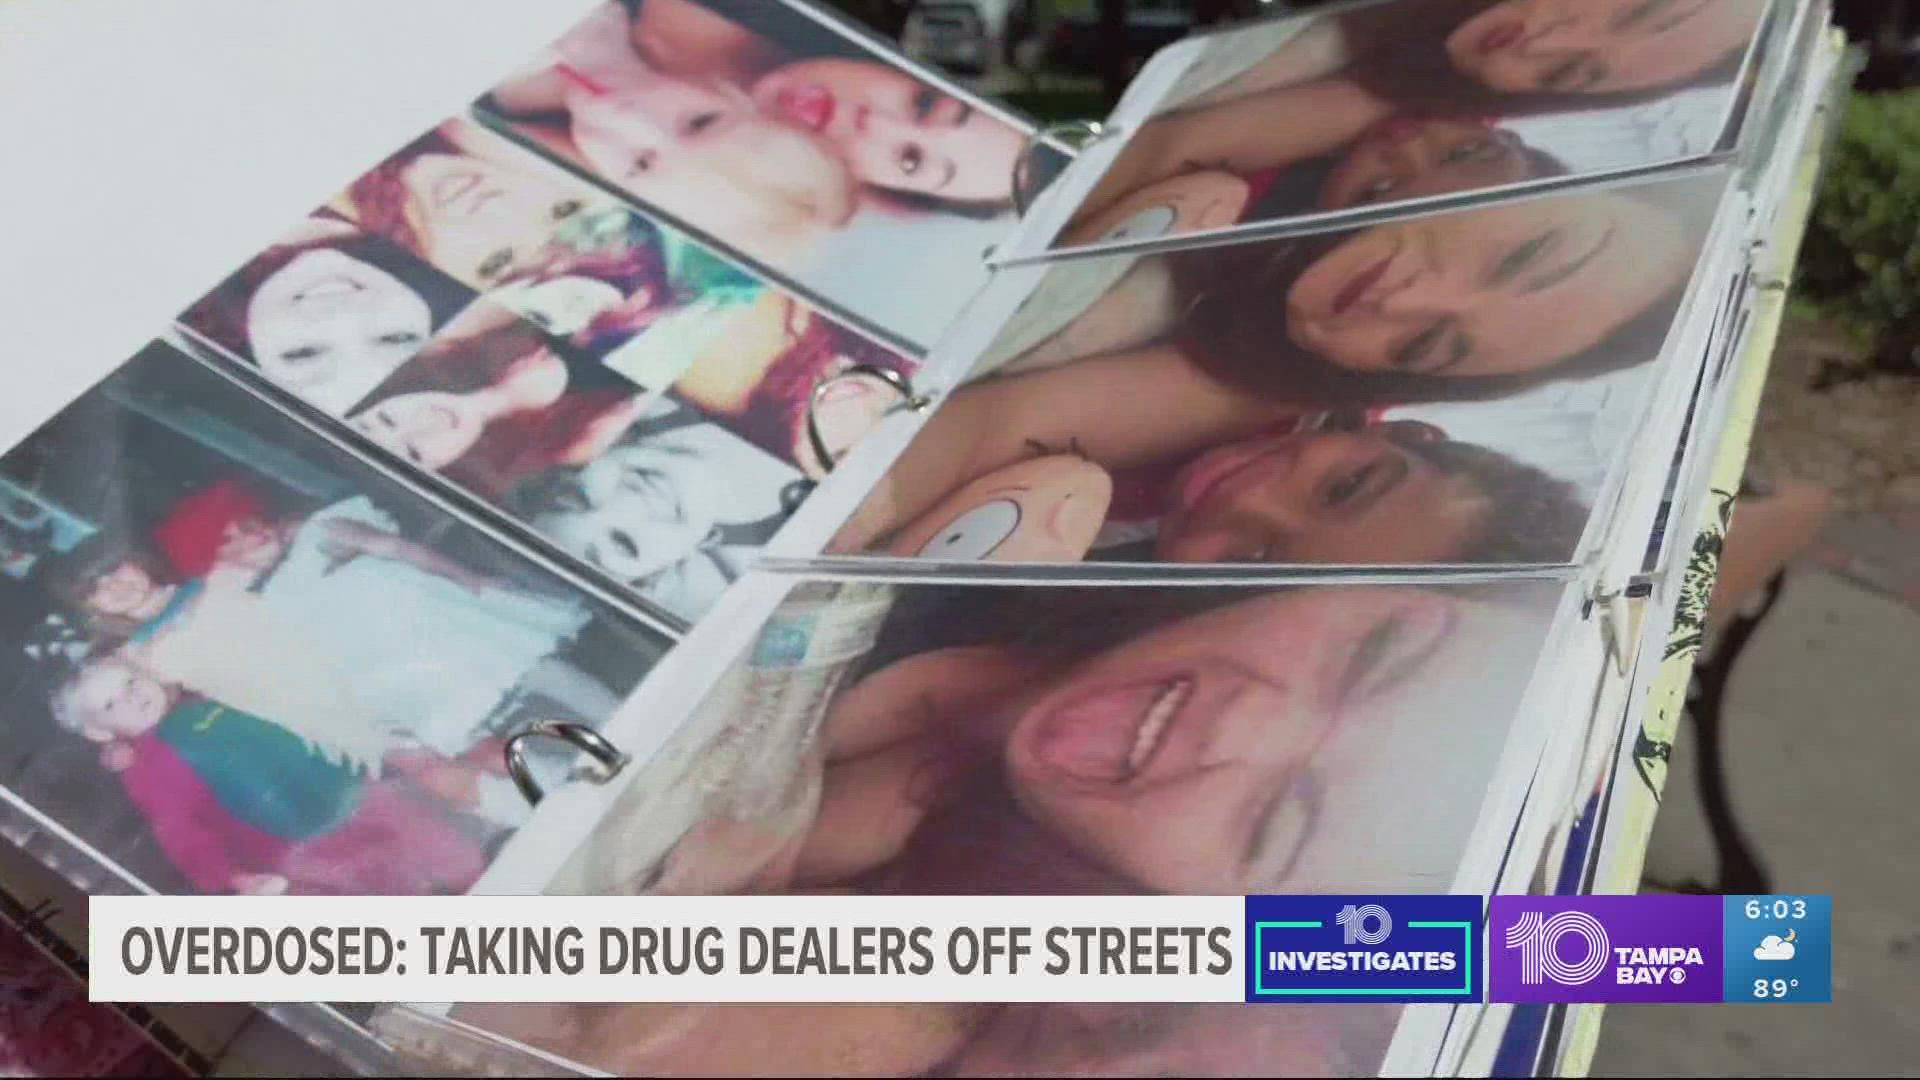 10Investigates uncovers a drug arrest in 2020 resulting from an undercover drug deal in 2018.